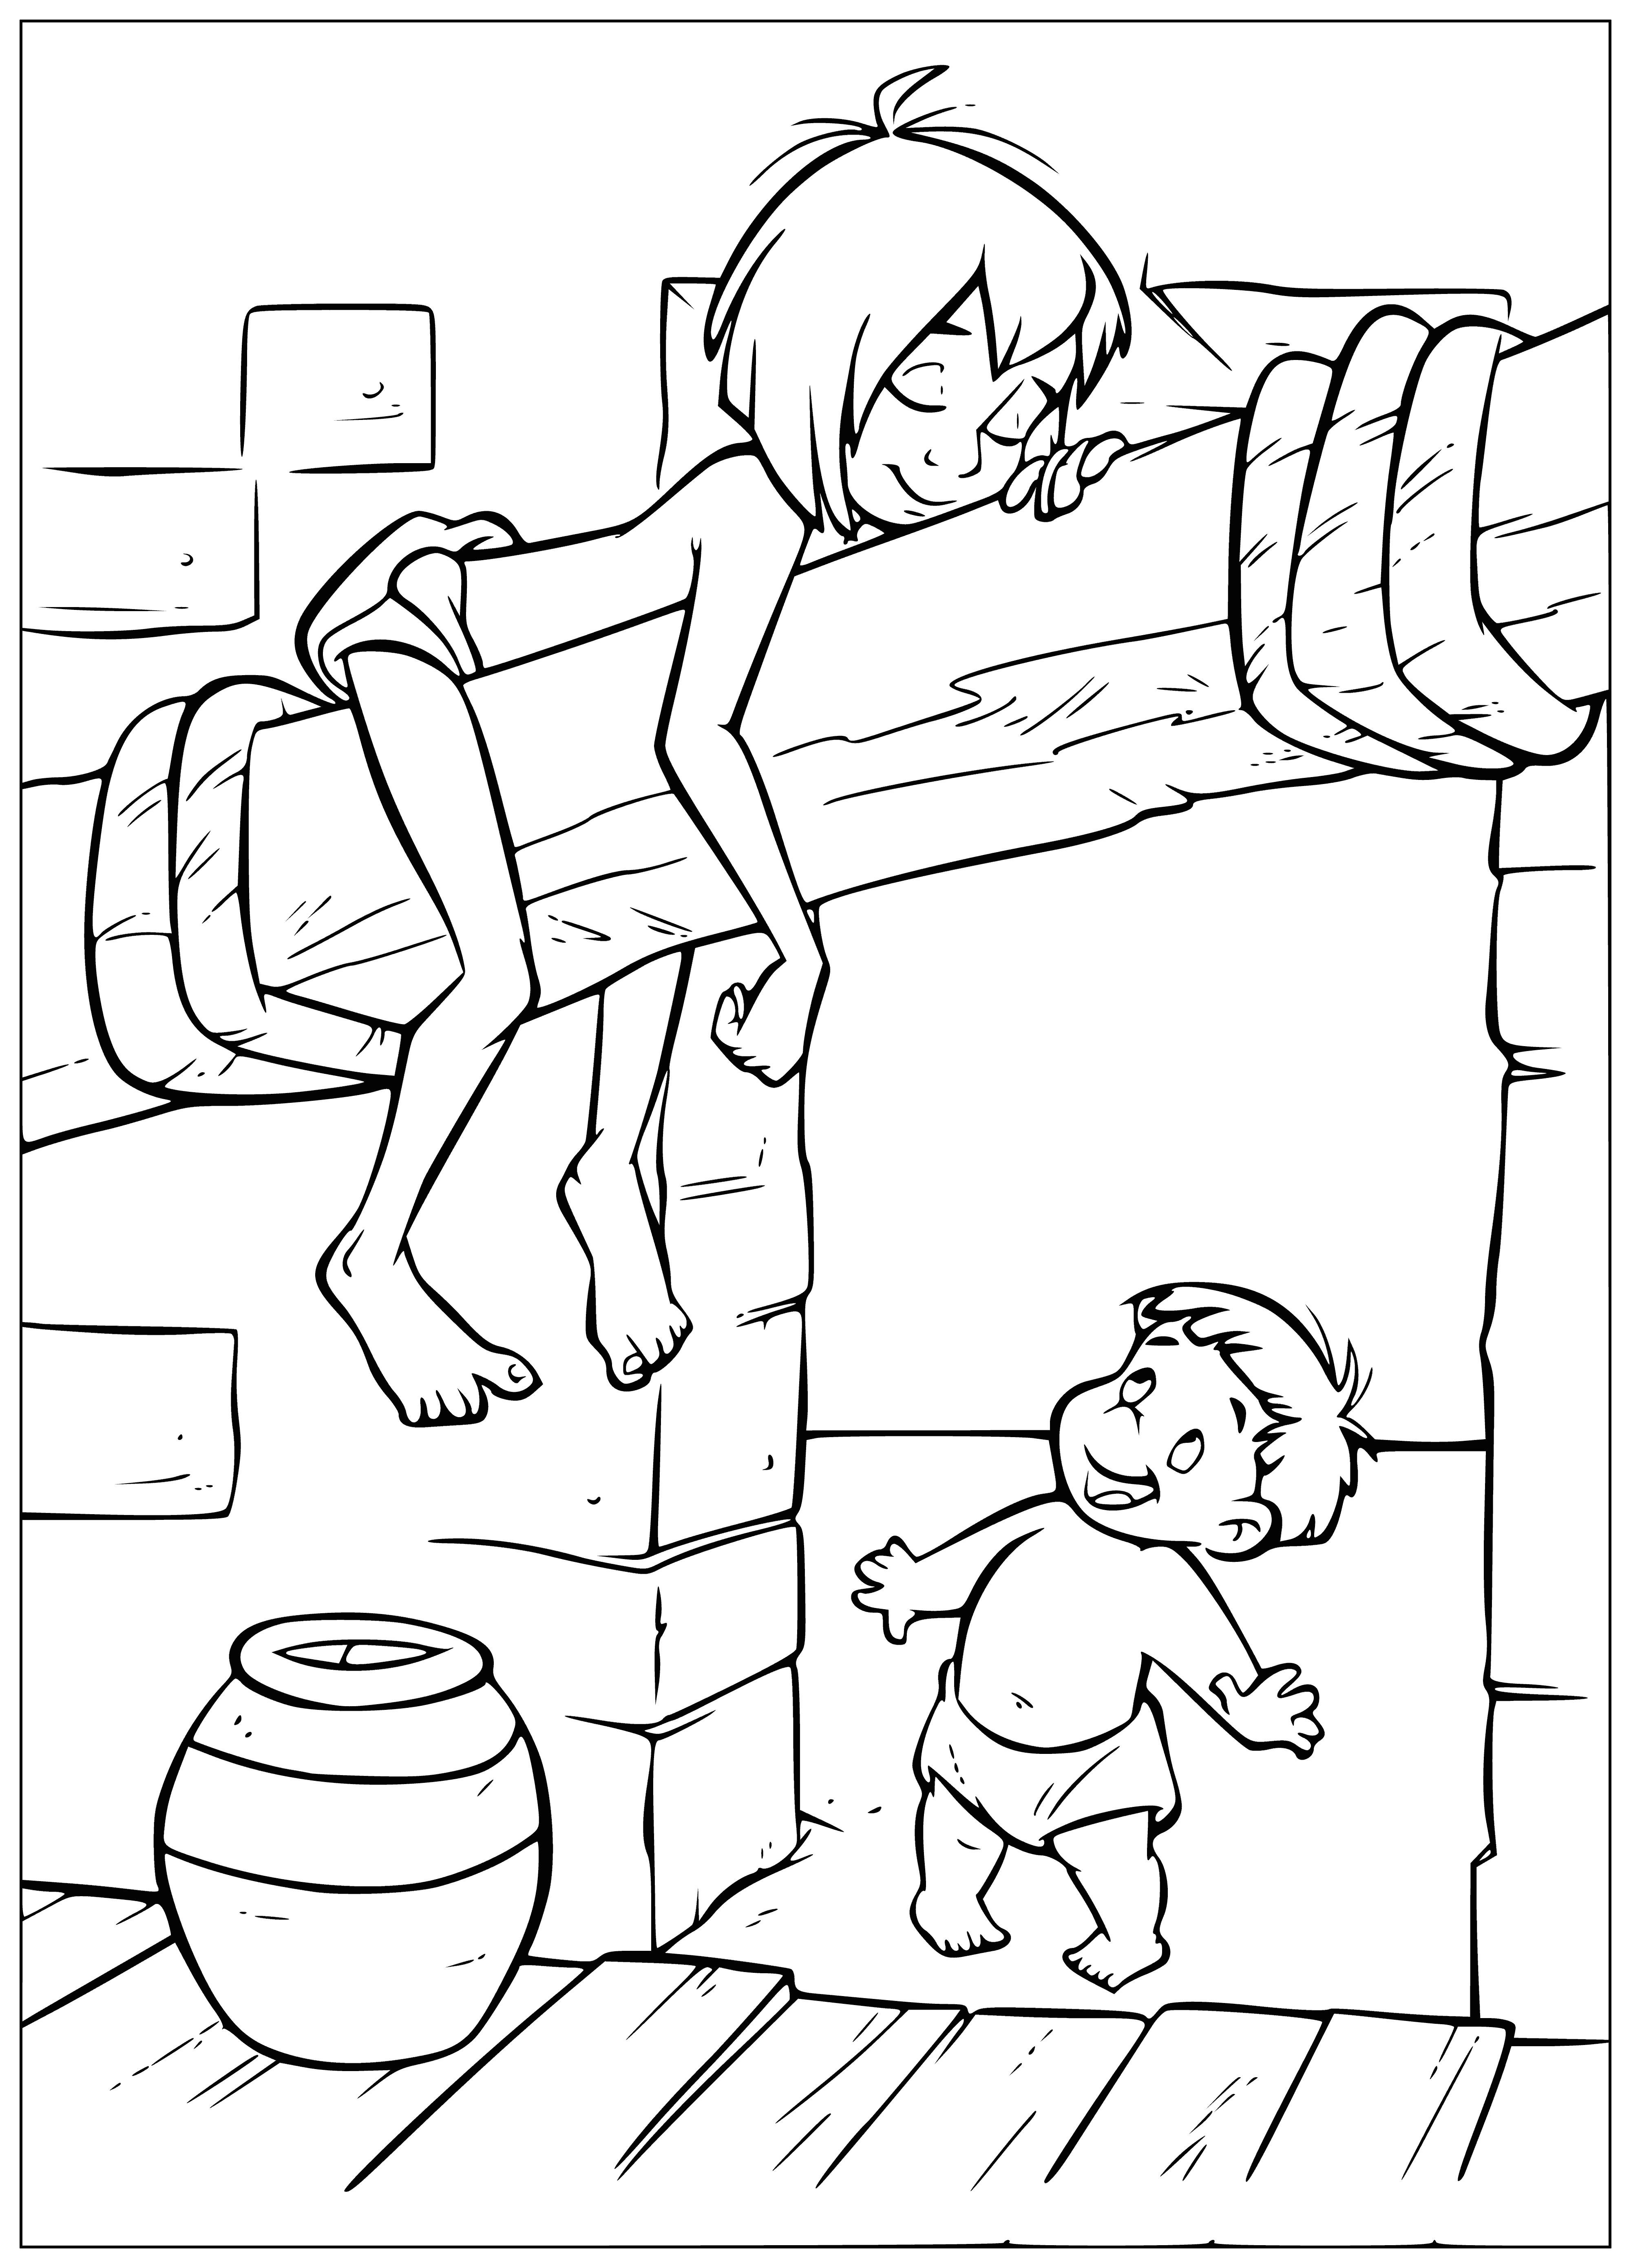 coloring page: Boy in jungle plays with baby: dark hair, loincloth, smiling on ground.